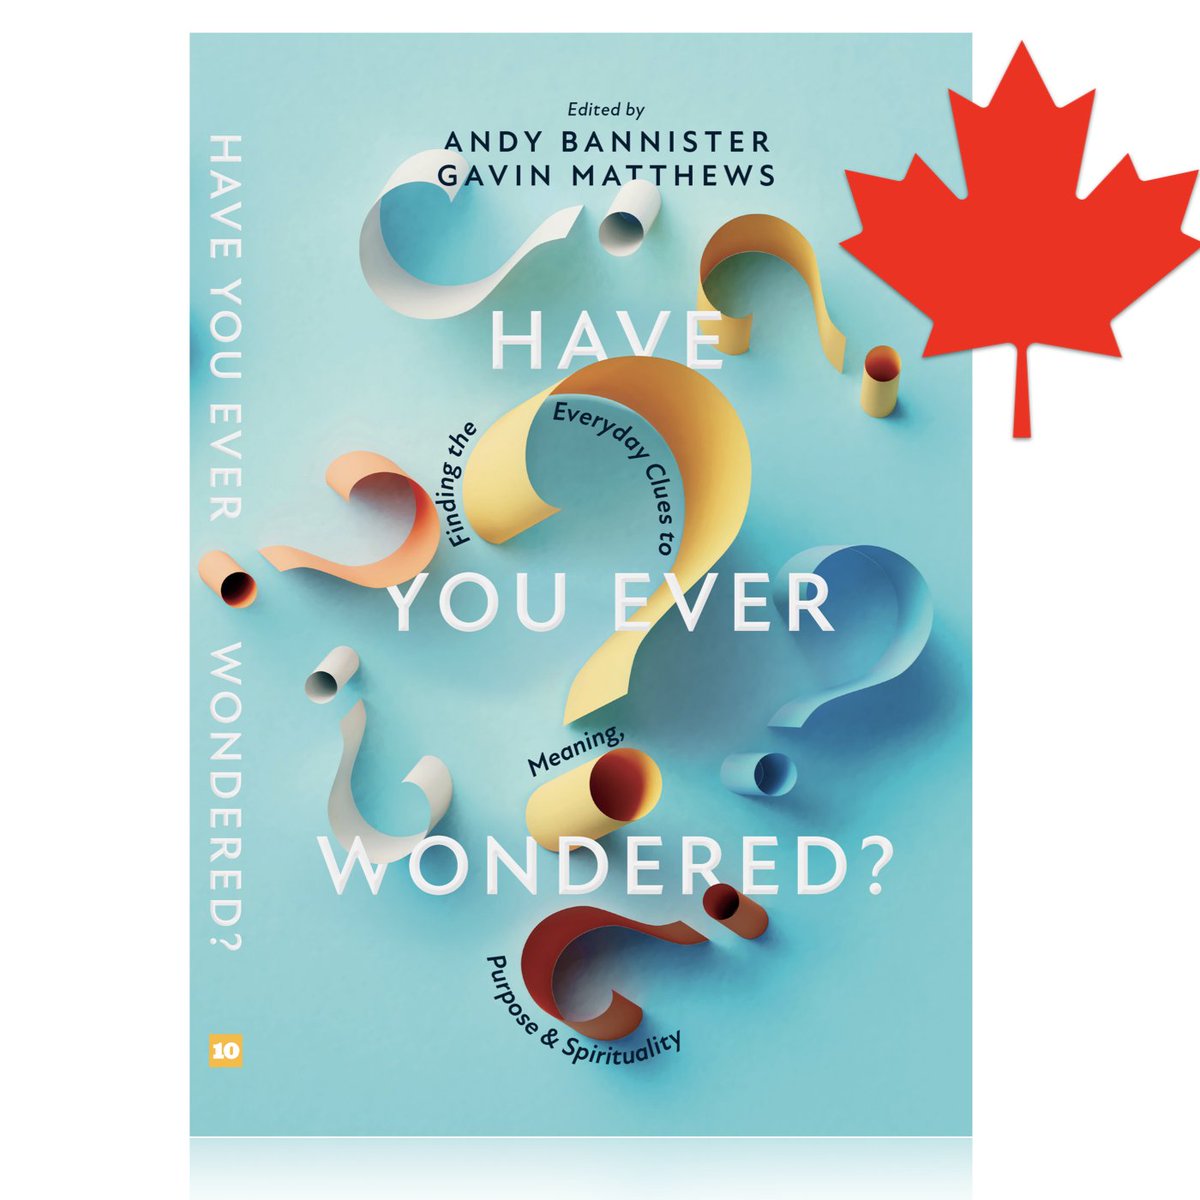 The new 'HAVE YOU EVER WONDERED?' book has launched in Canada today! It's available via our friends at @ApologeticsCAN here: store.apologeticscanada.com/products/wonde… (And I'm looking forward to being back in Canada speaking this summer!)